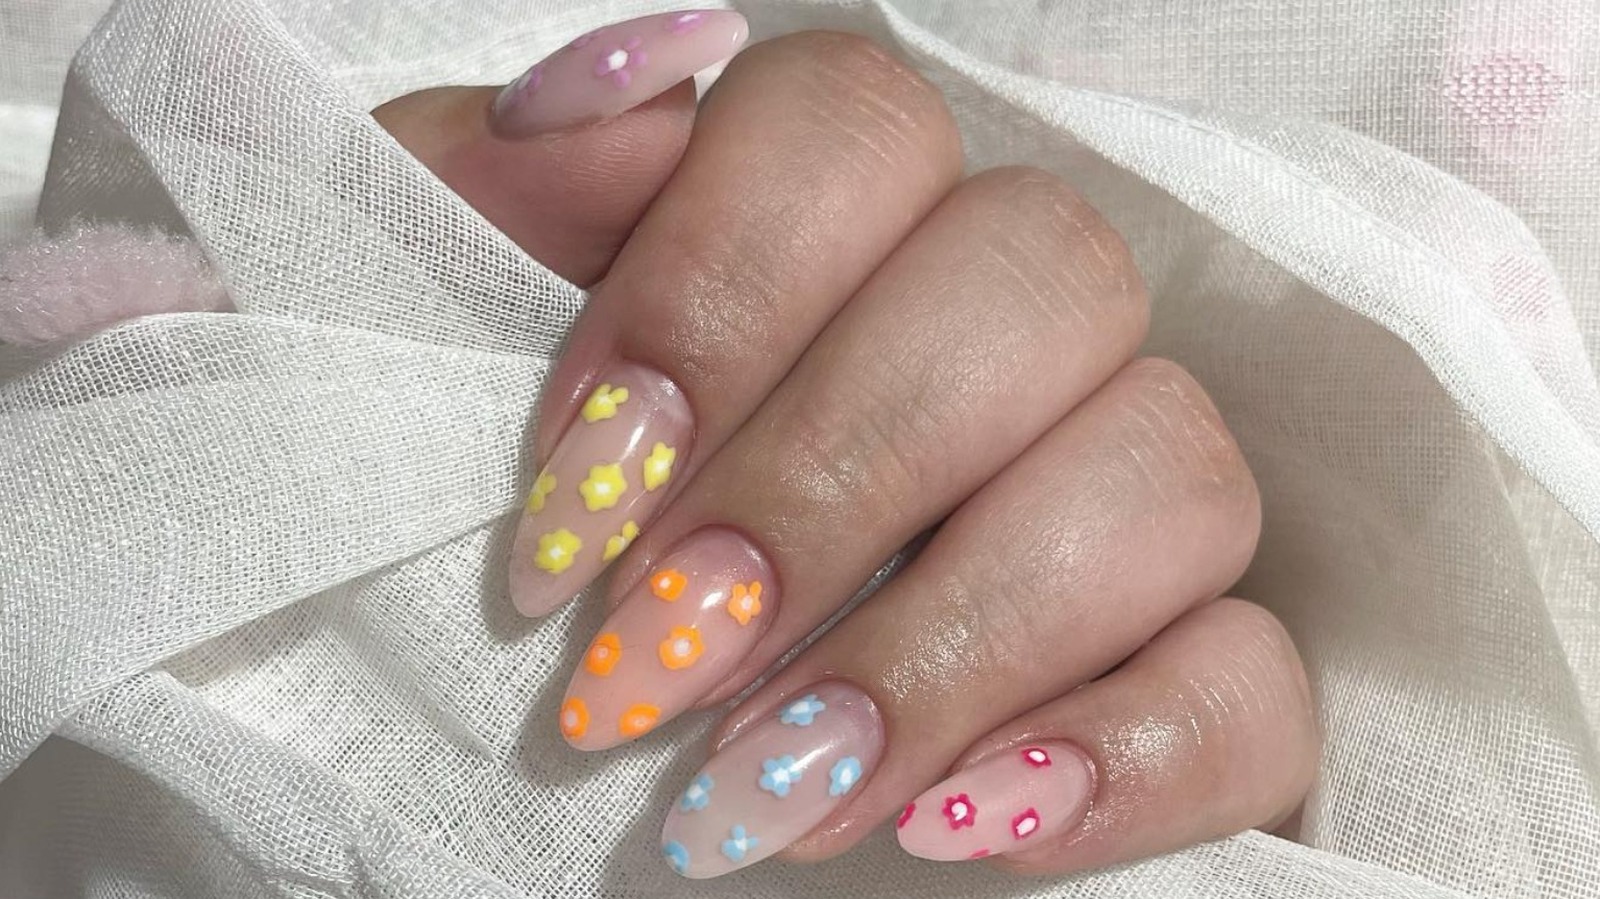 The Latest Manicure Trend? Nail Art Inspired by Precious Stones